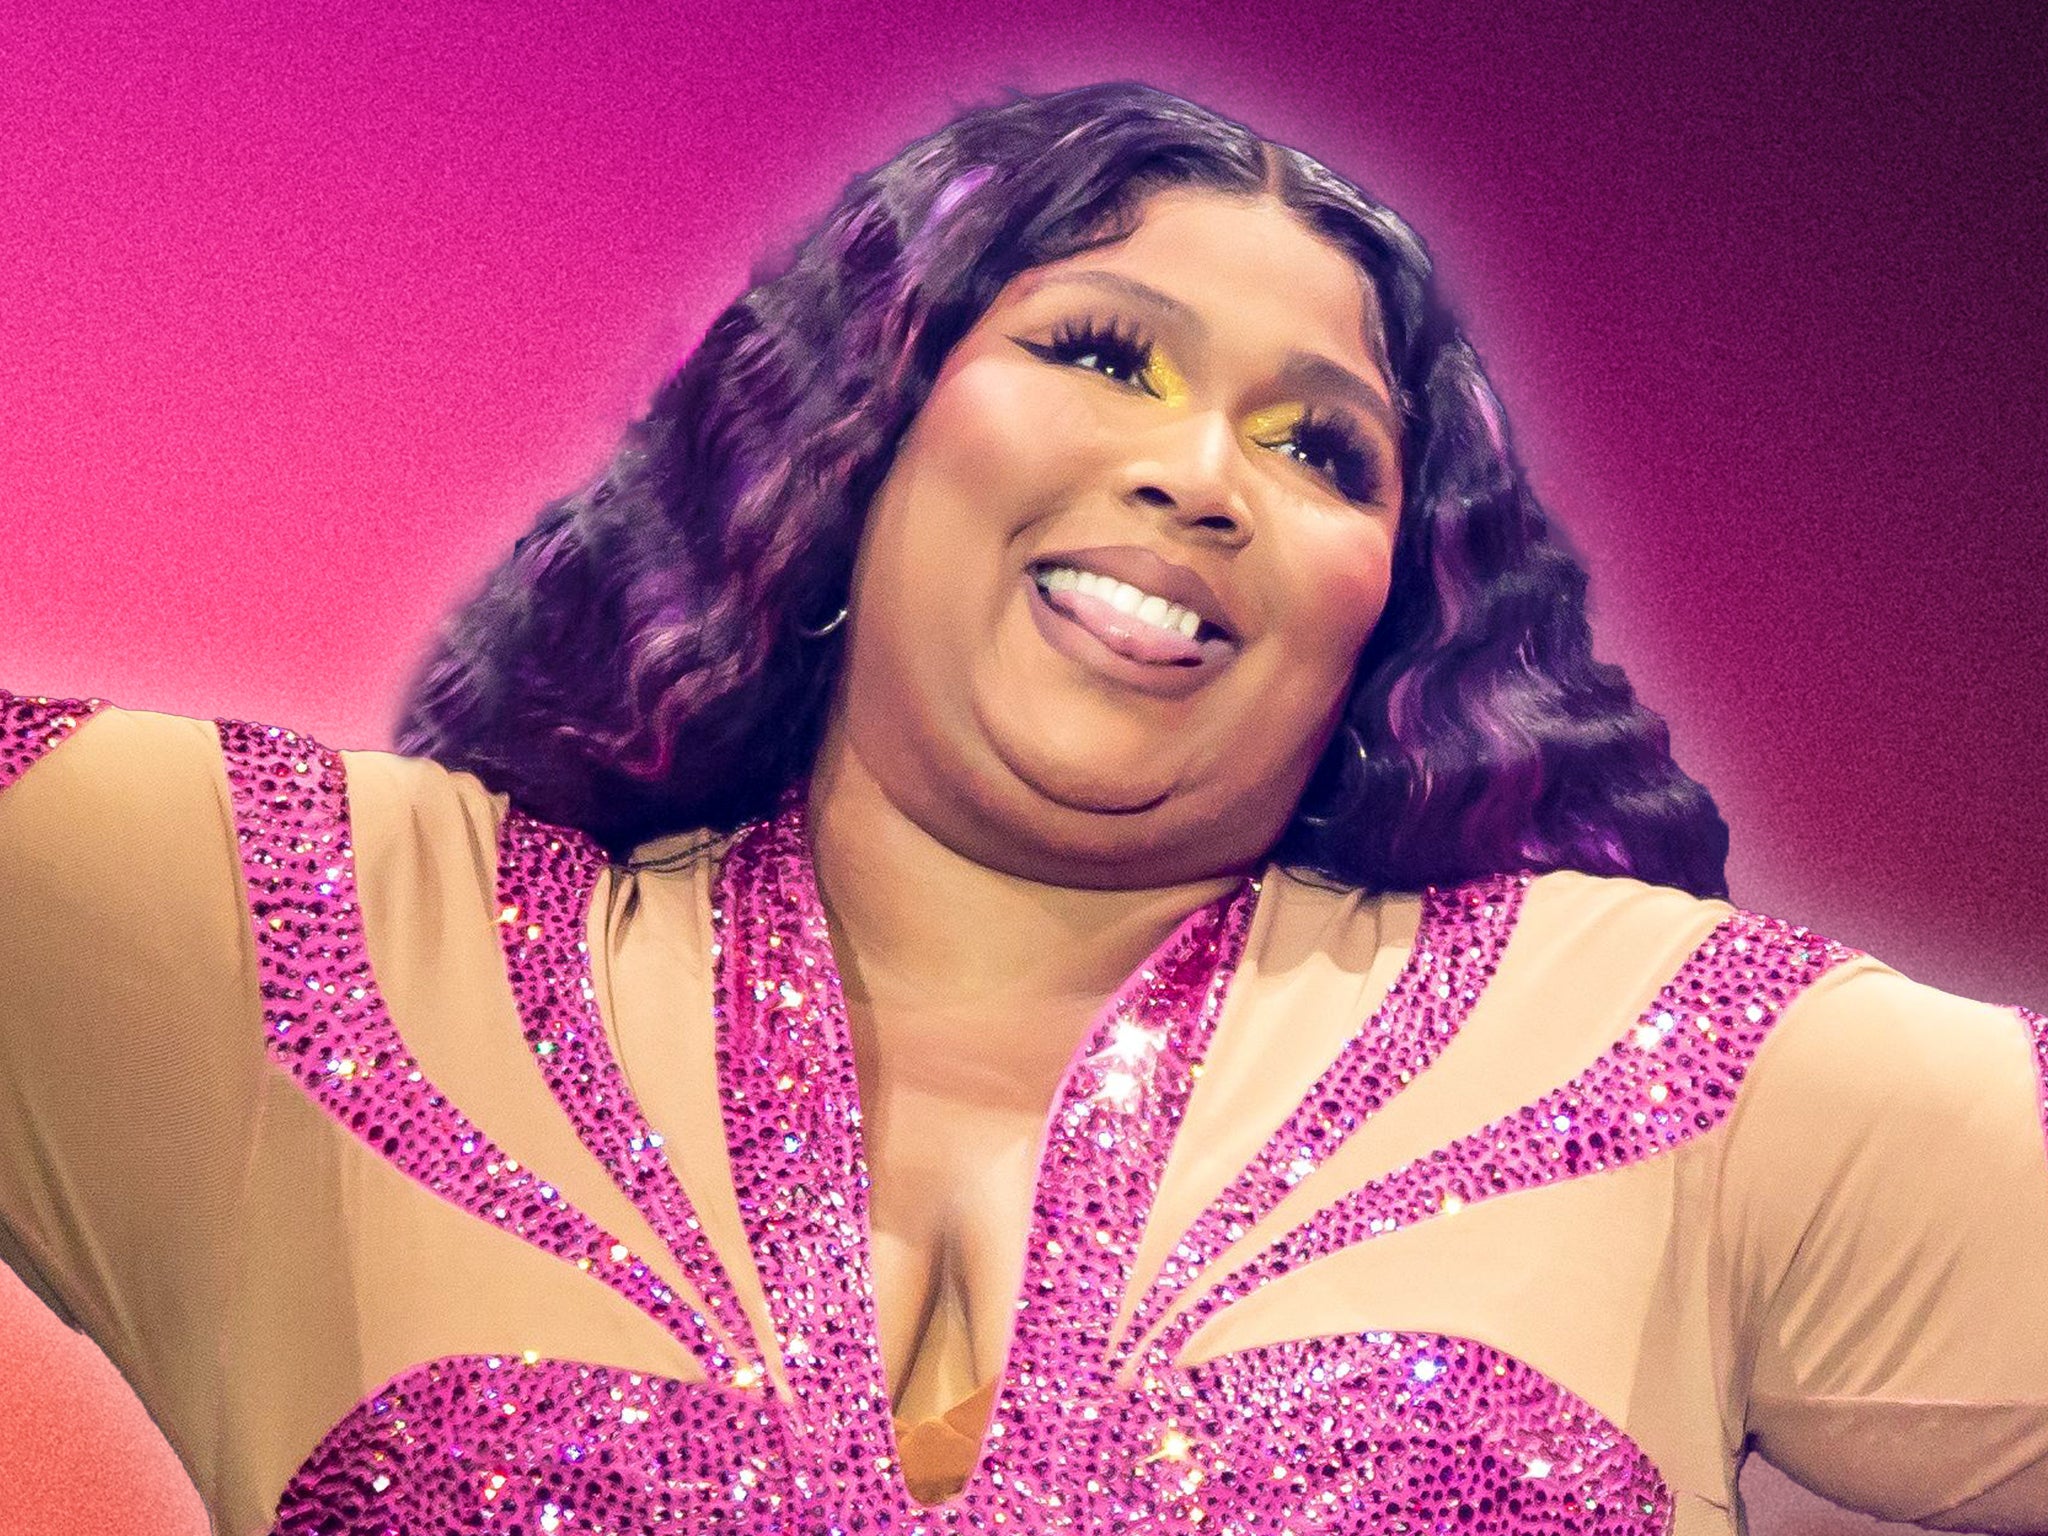 Lizzo lawsuit and allegations The poster girl for body positivity, whose empowering image is now under threat The Independent